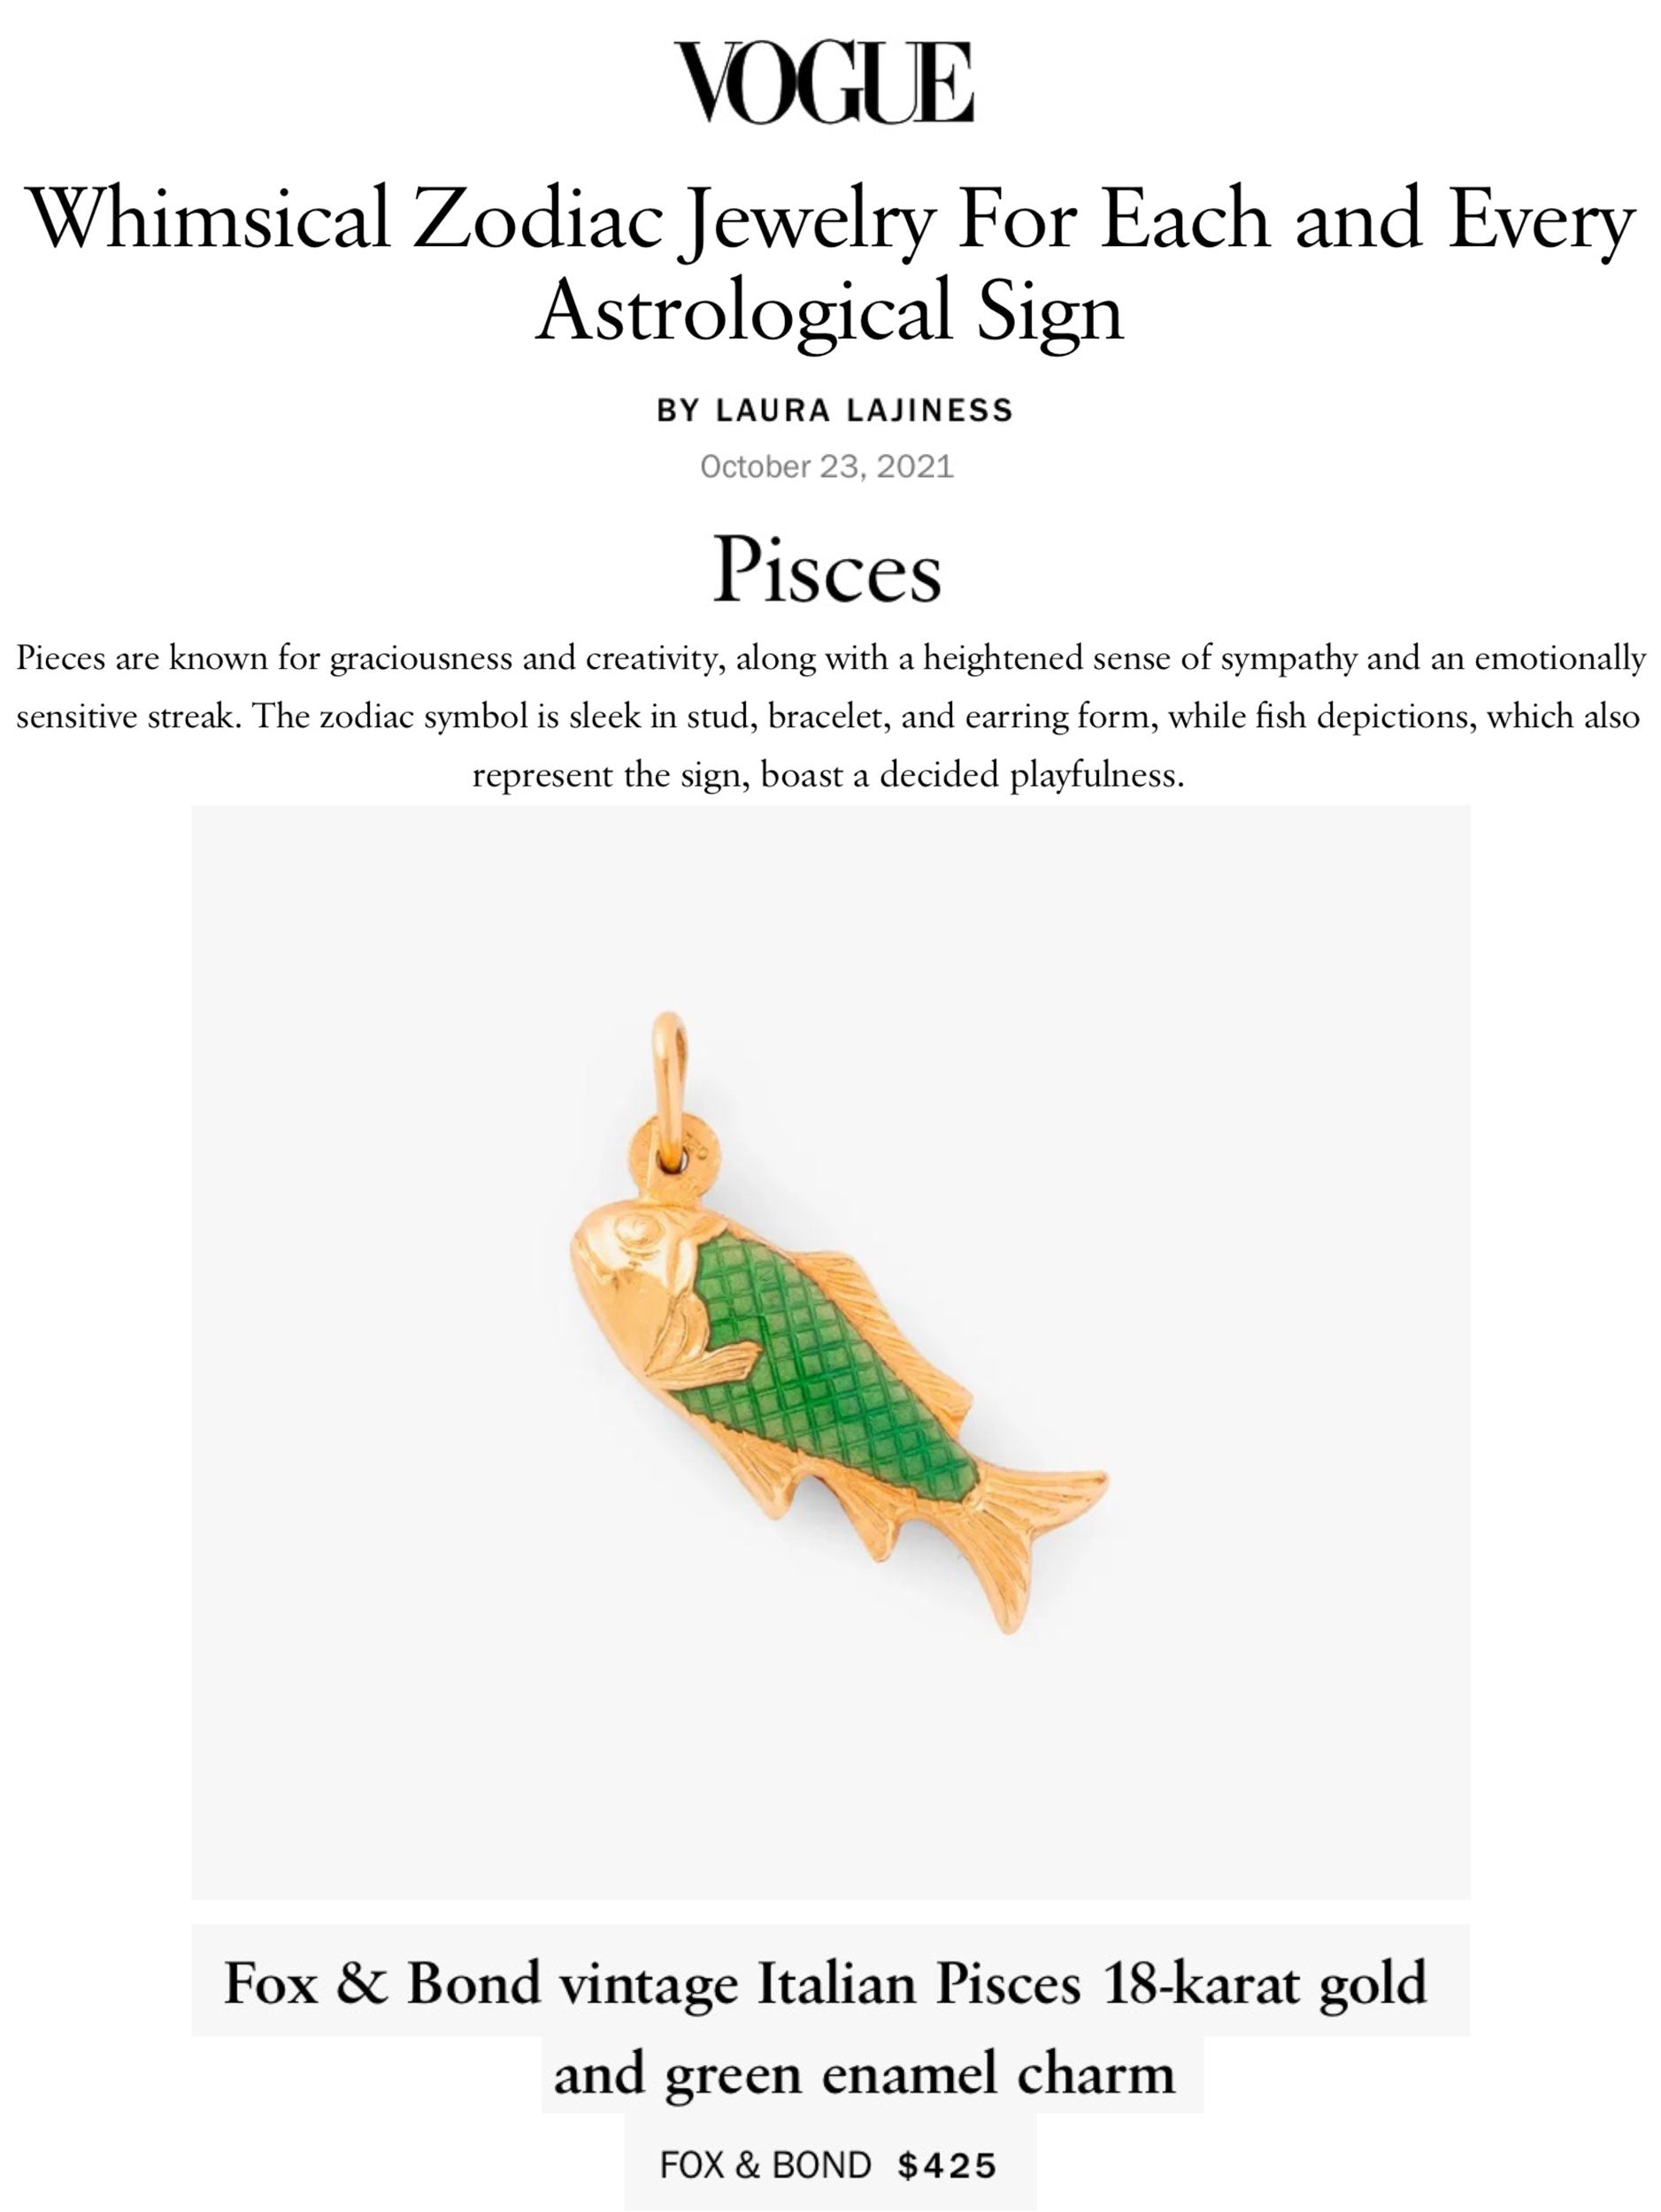 Vogue.com: Whimsical Zodiac Jewelry For Each and Every Astrological Sign